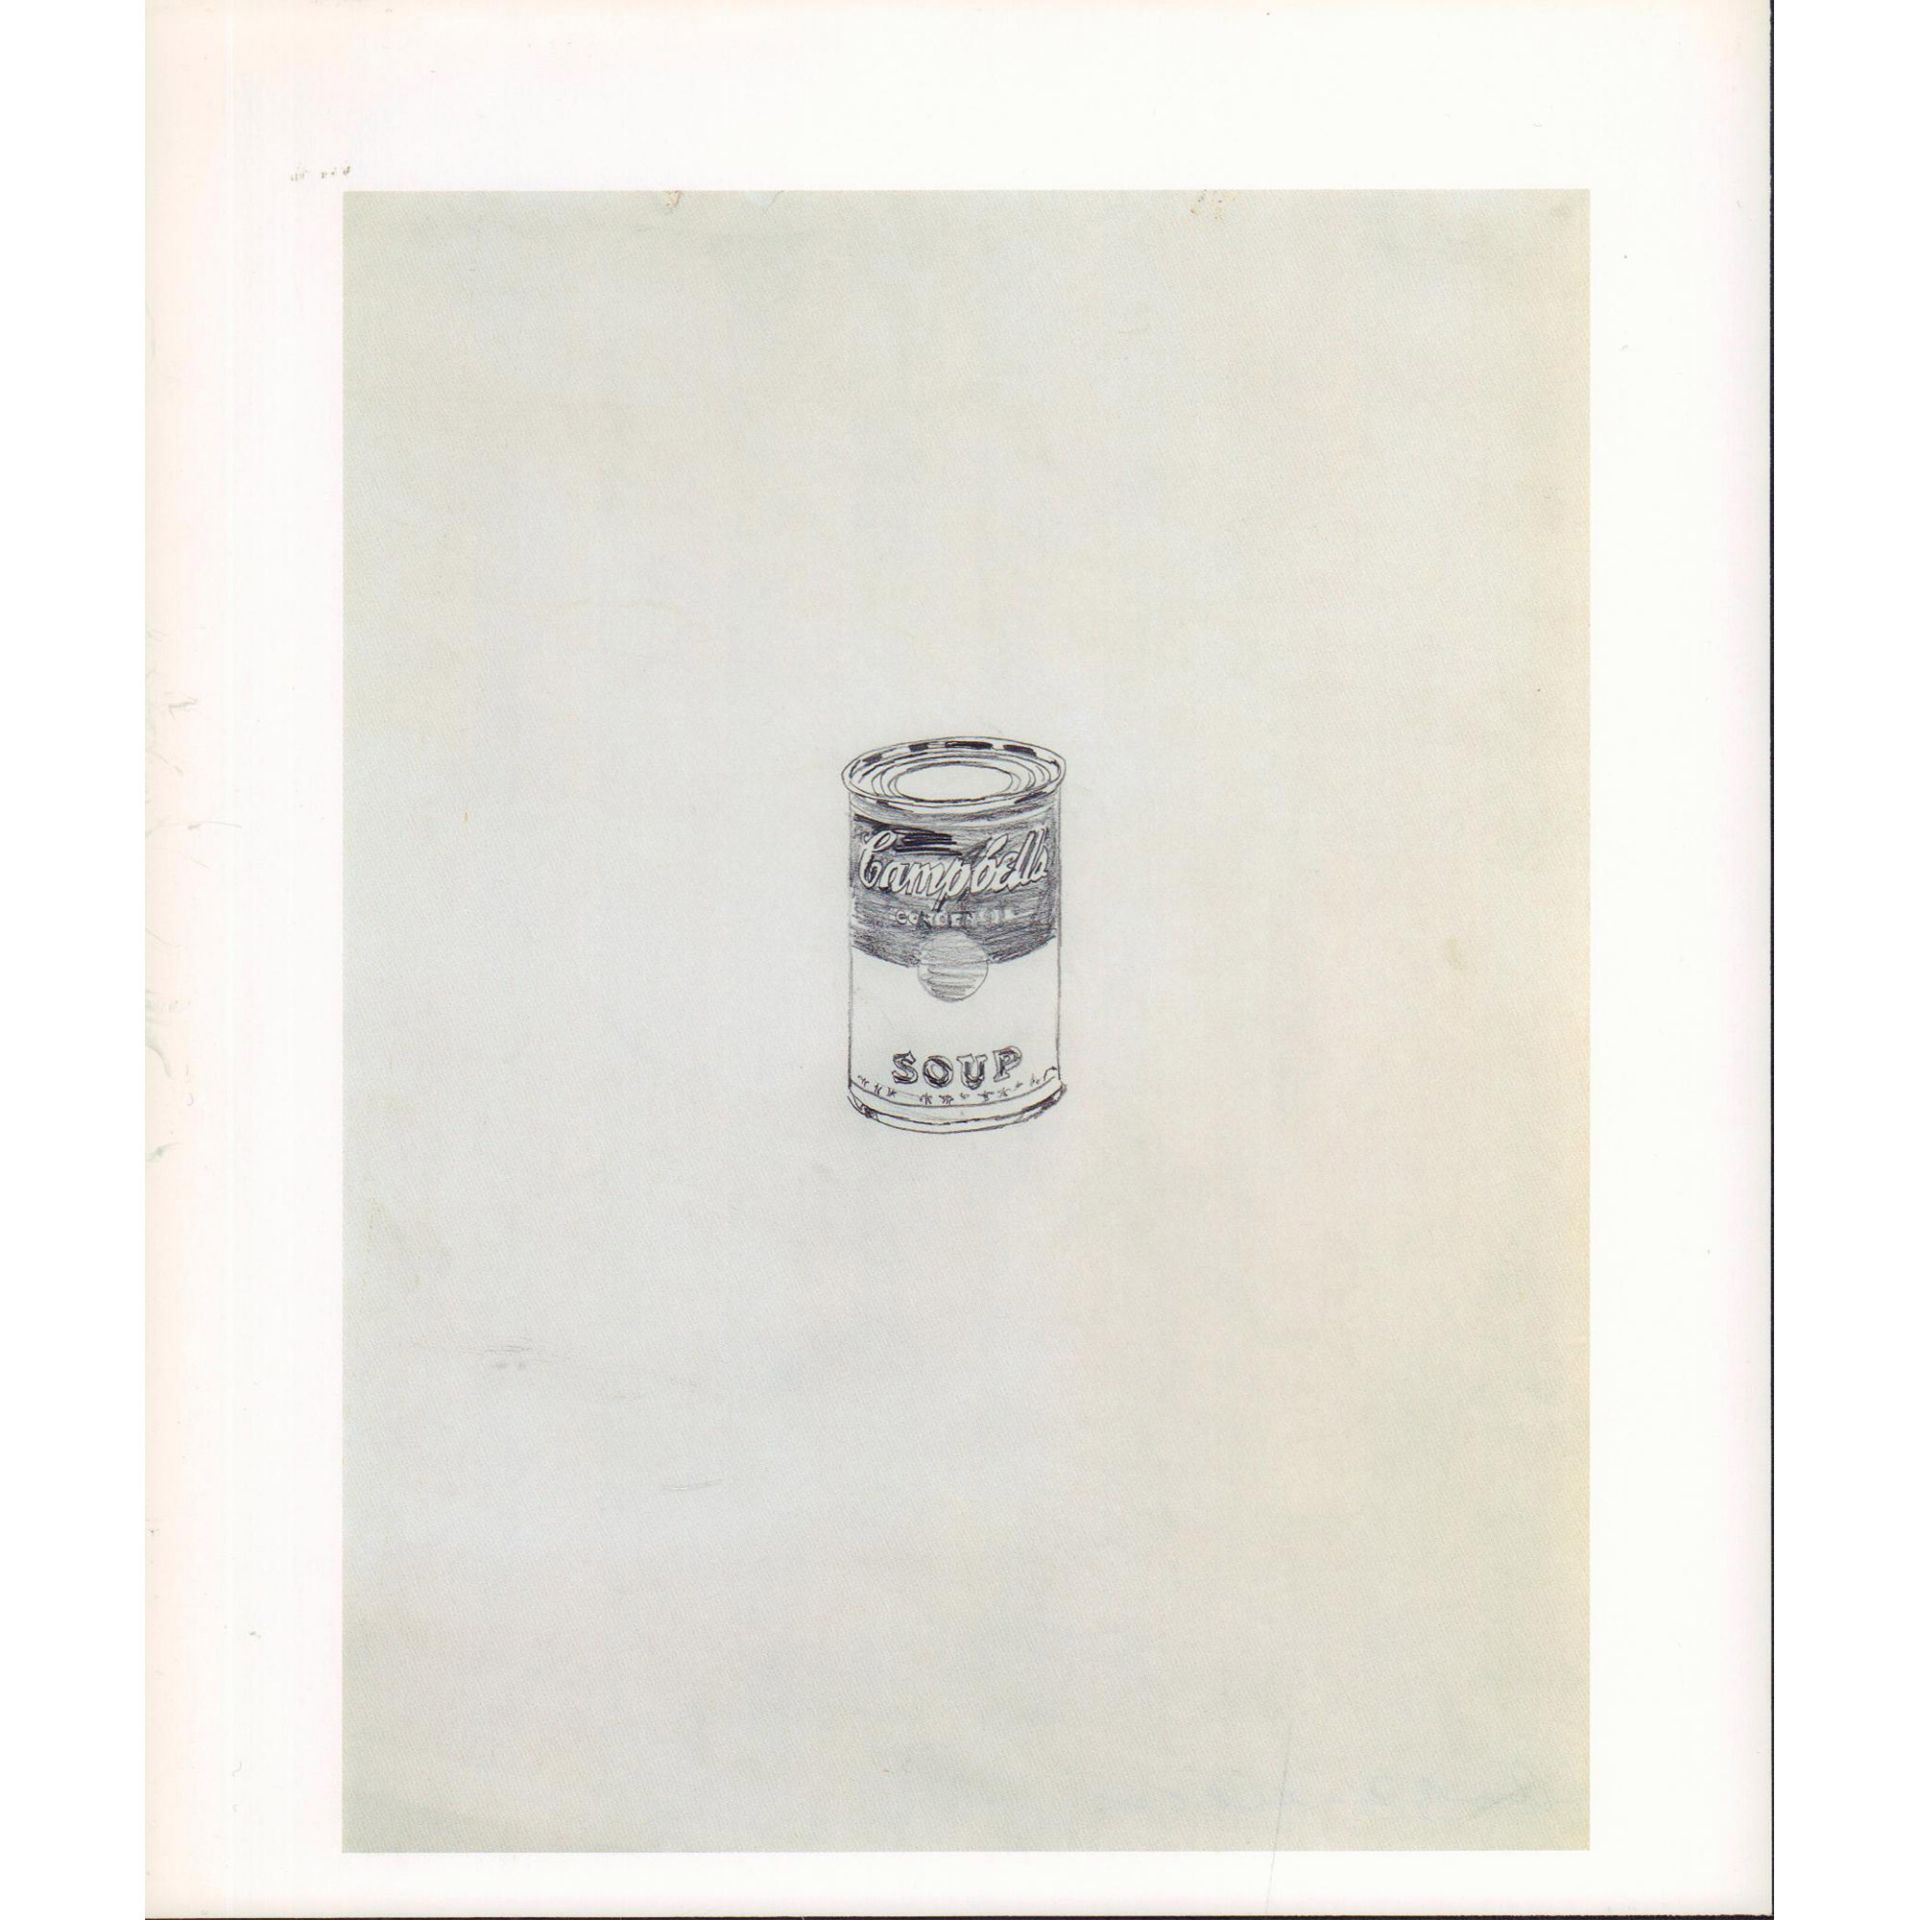 Andy Warhol, Black & White Book Plate, Coca Cola, Signed - Image 2 of 3